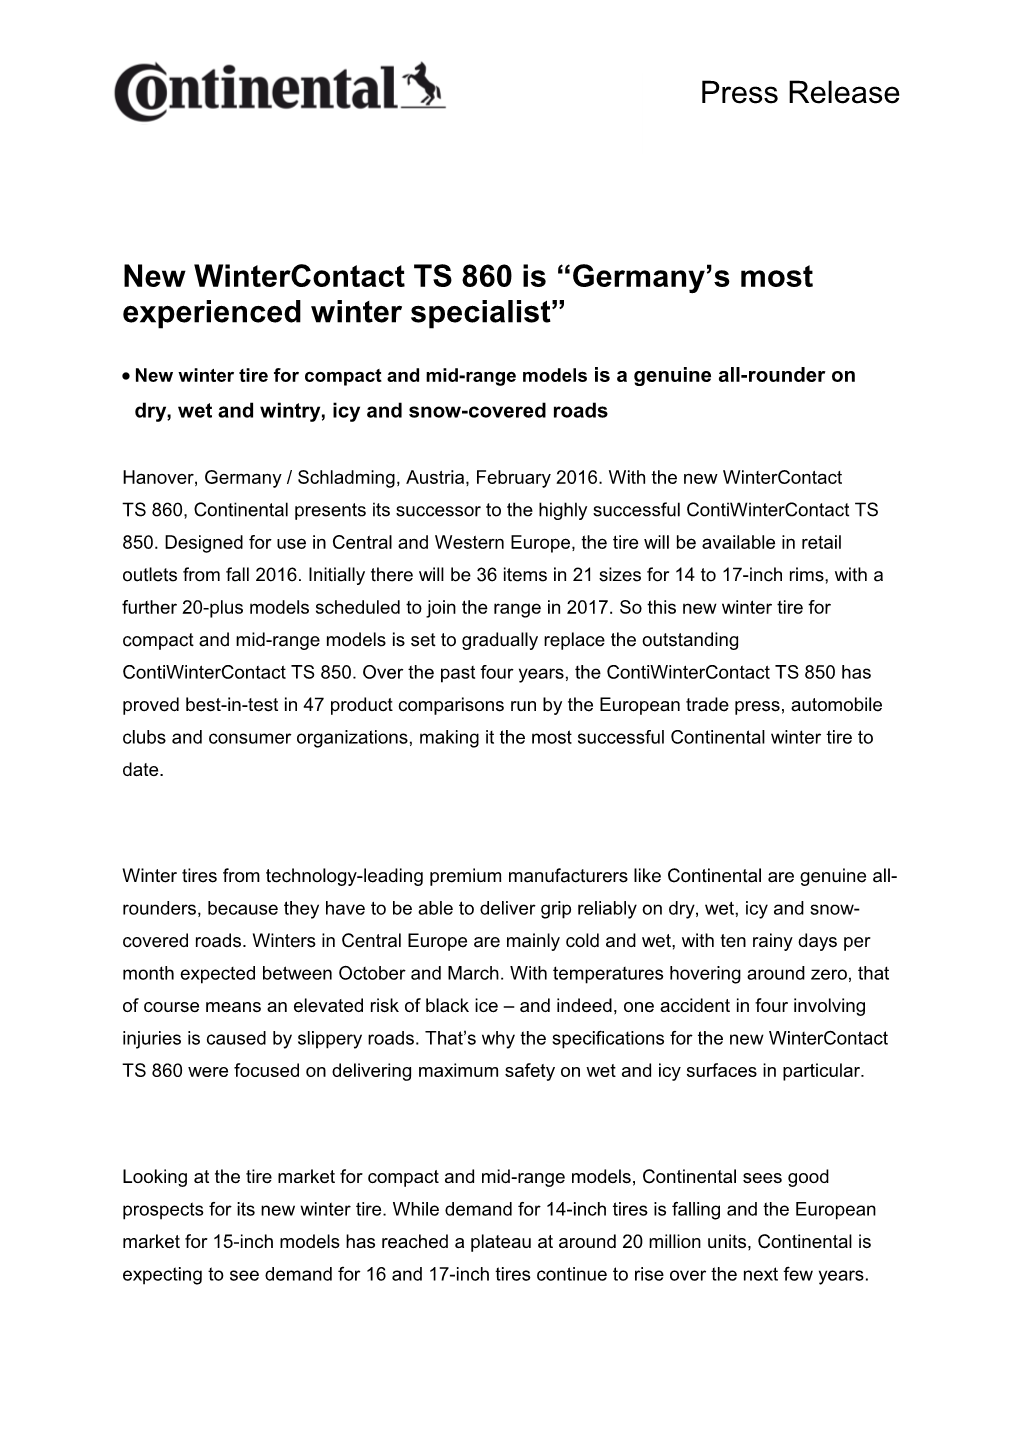 New Wintercontact TS 860 Is Germany S Most Experienced Winter Specialist